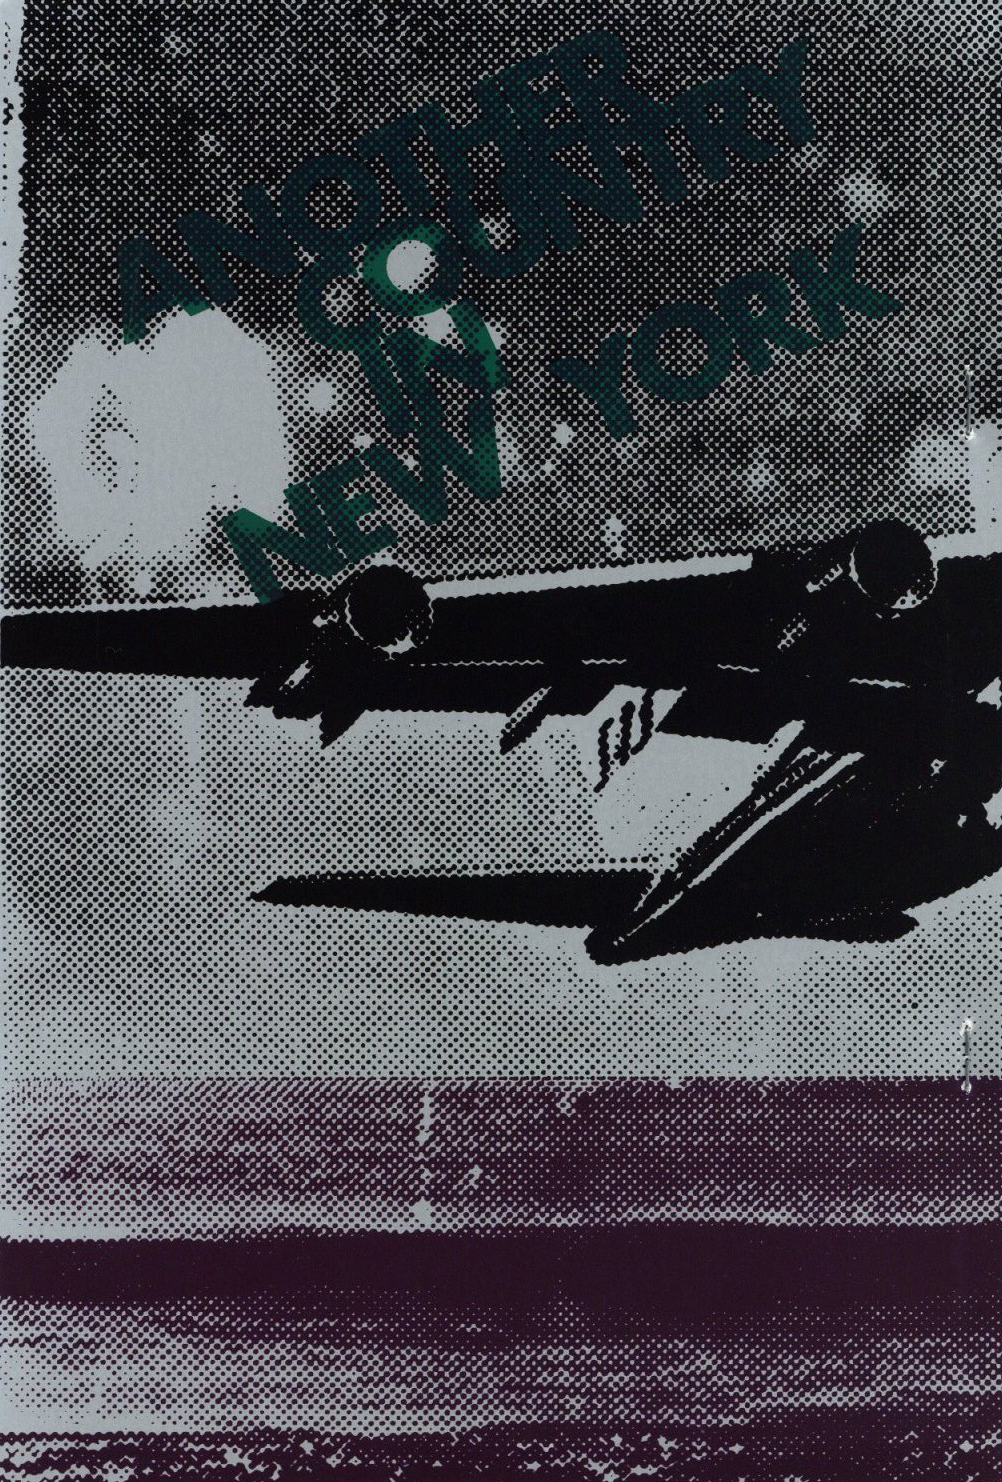 「ANOTHER COUNTRY IN NEW YORK: Airplane (reprint) / 森山大道」メイン画像